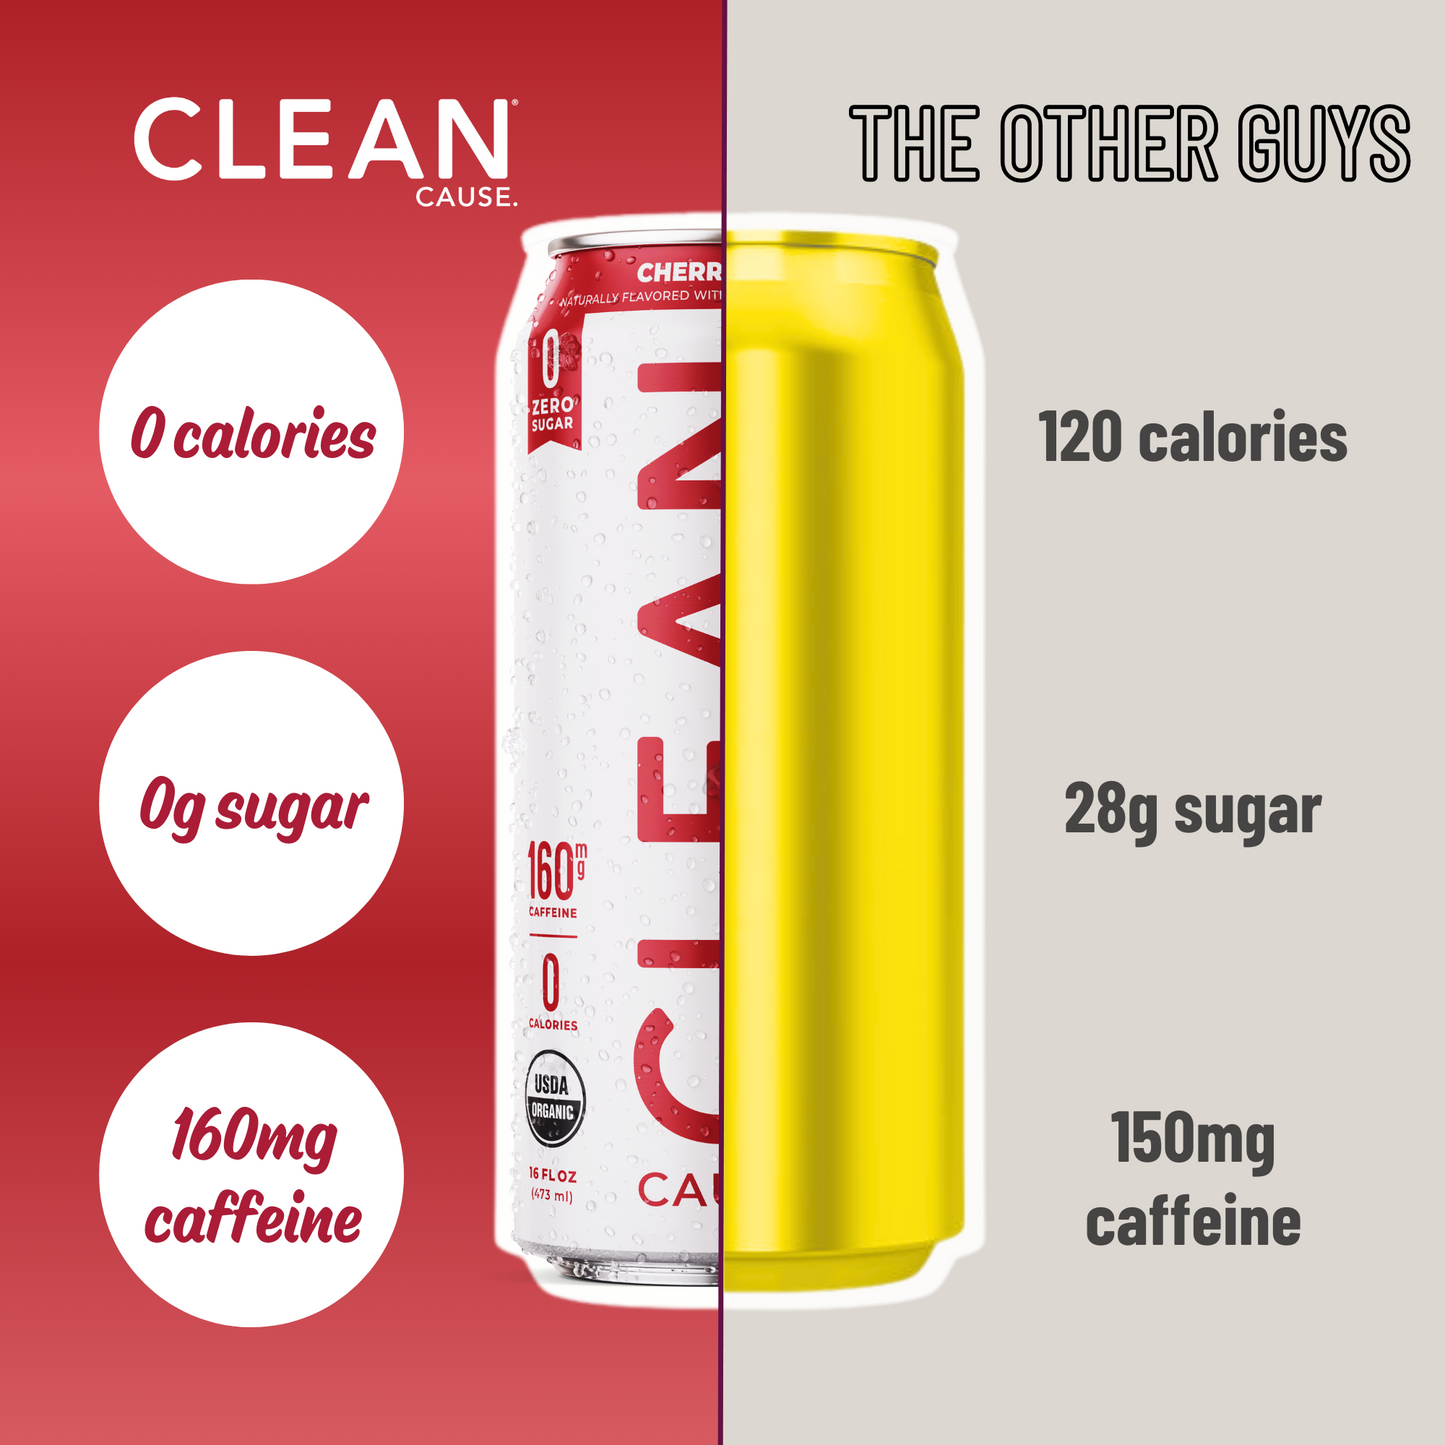 A can split between CLEAN Cherry KLime Yerba Mate and "The Other Guys" showing CLEAN with 0 calories, 0g sugar, and 160mg caffeine and the other guys with 120 calories, 28g sugar, and 150mg caffeine